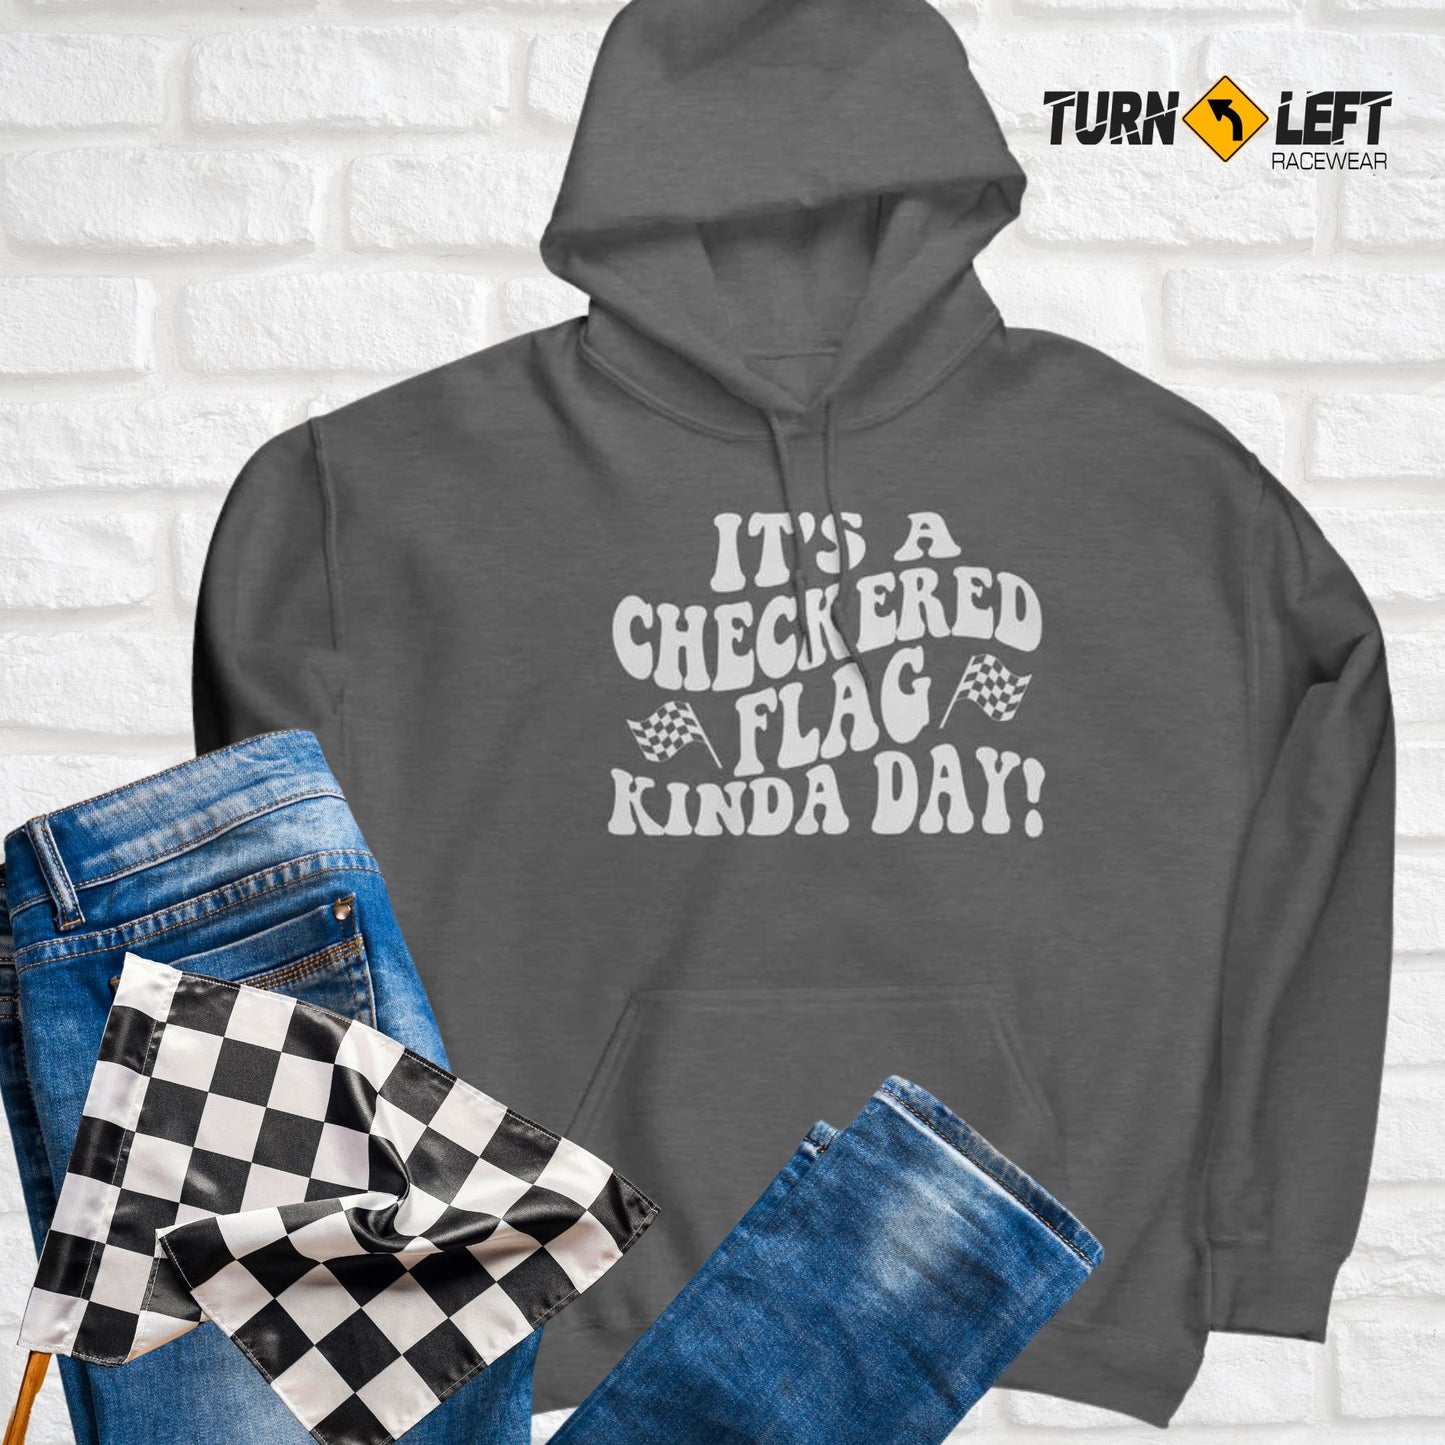 Car Racing Hooded Sweatshirts For Women. It's A Checkered Flag Kind Of Day. Dirt track racing sweatshirts. Dirt track racing shirts for all your dirt car racing events.